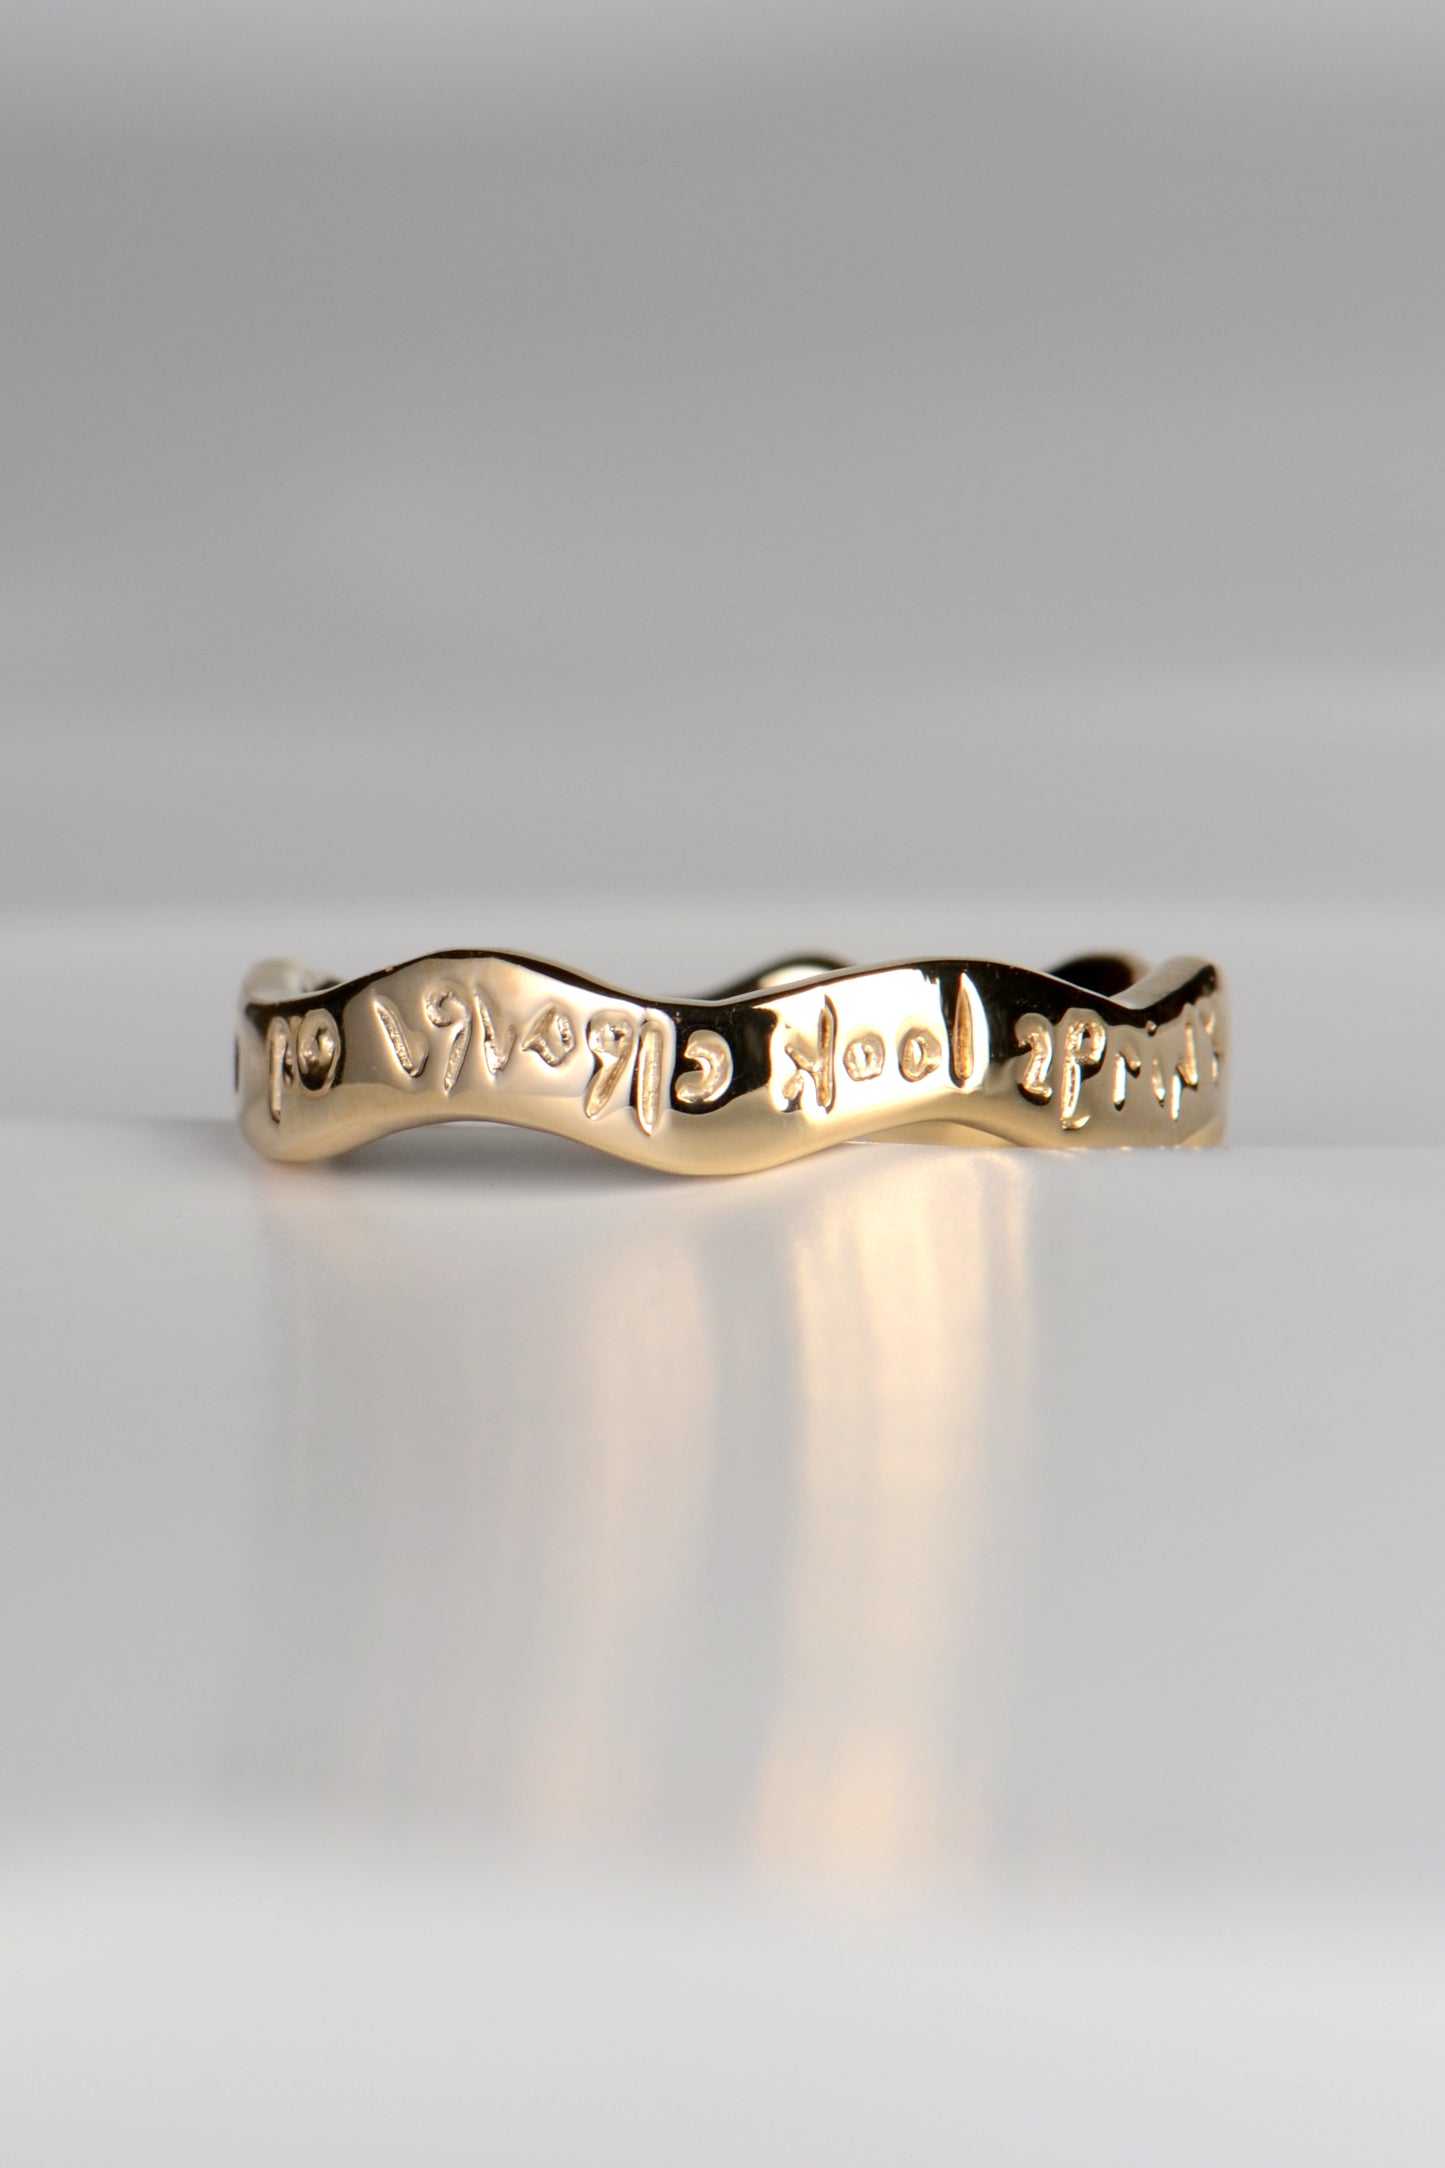 Gold reflection ring with diamond